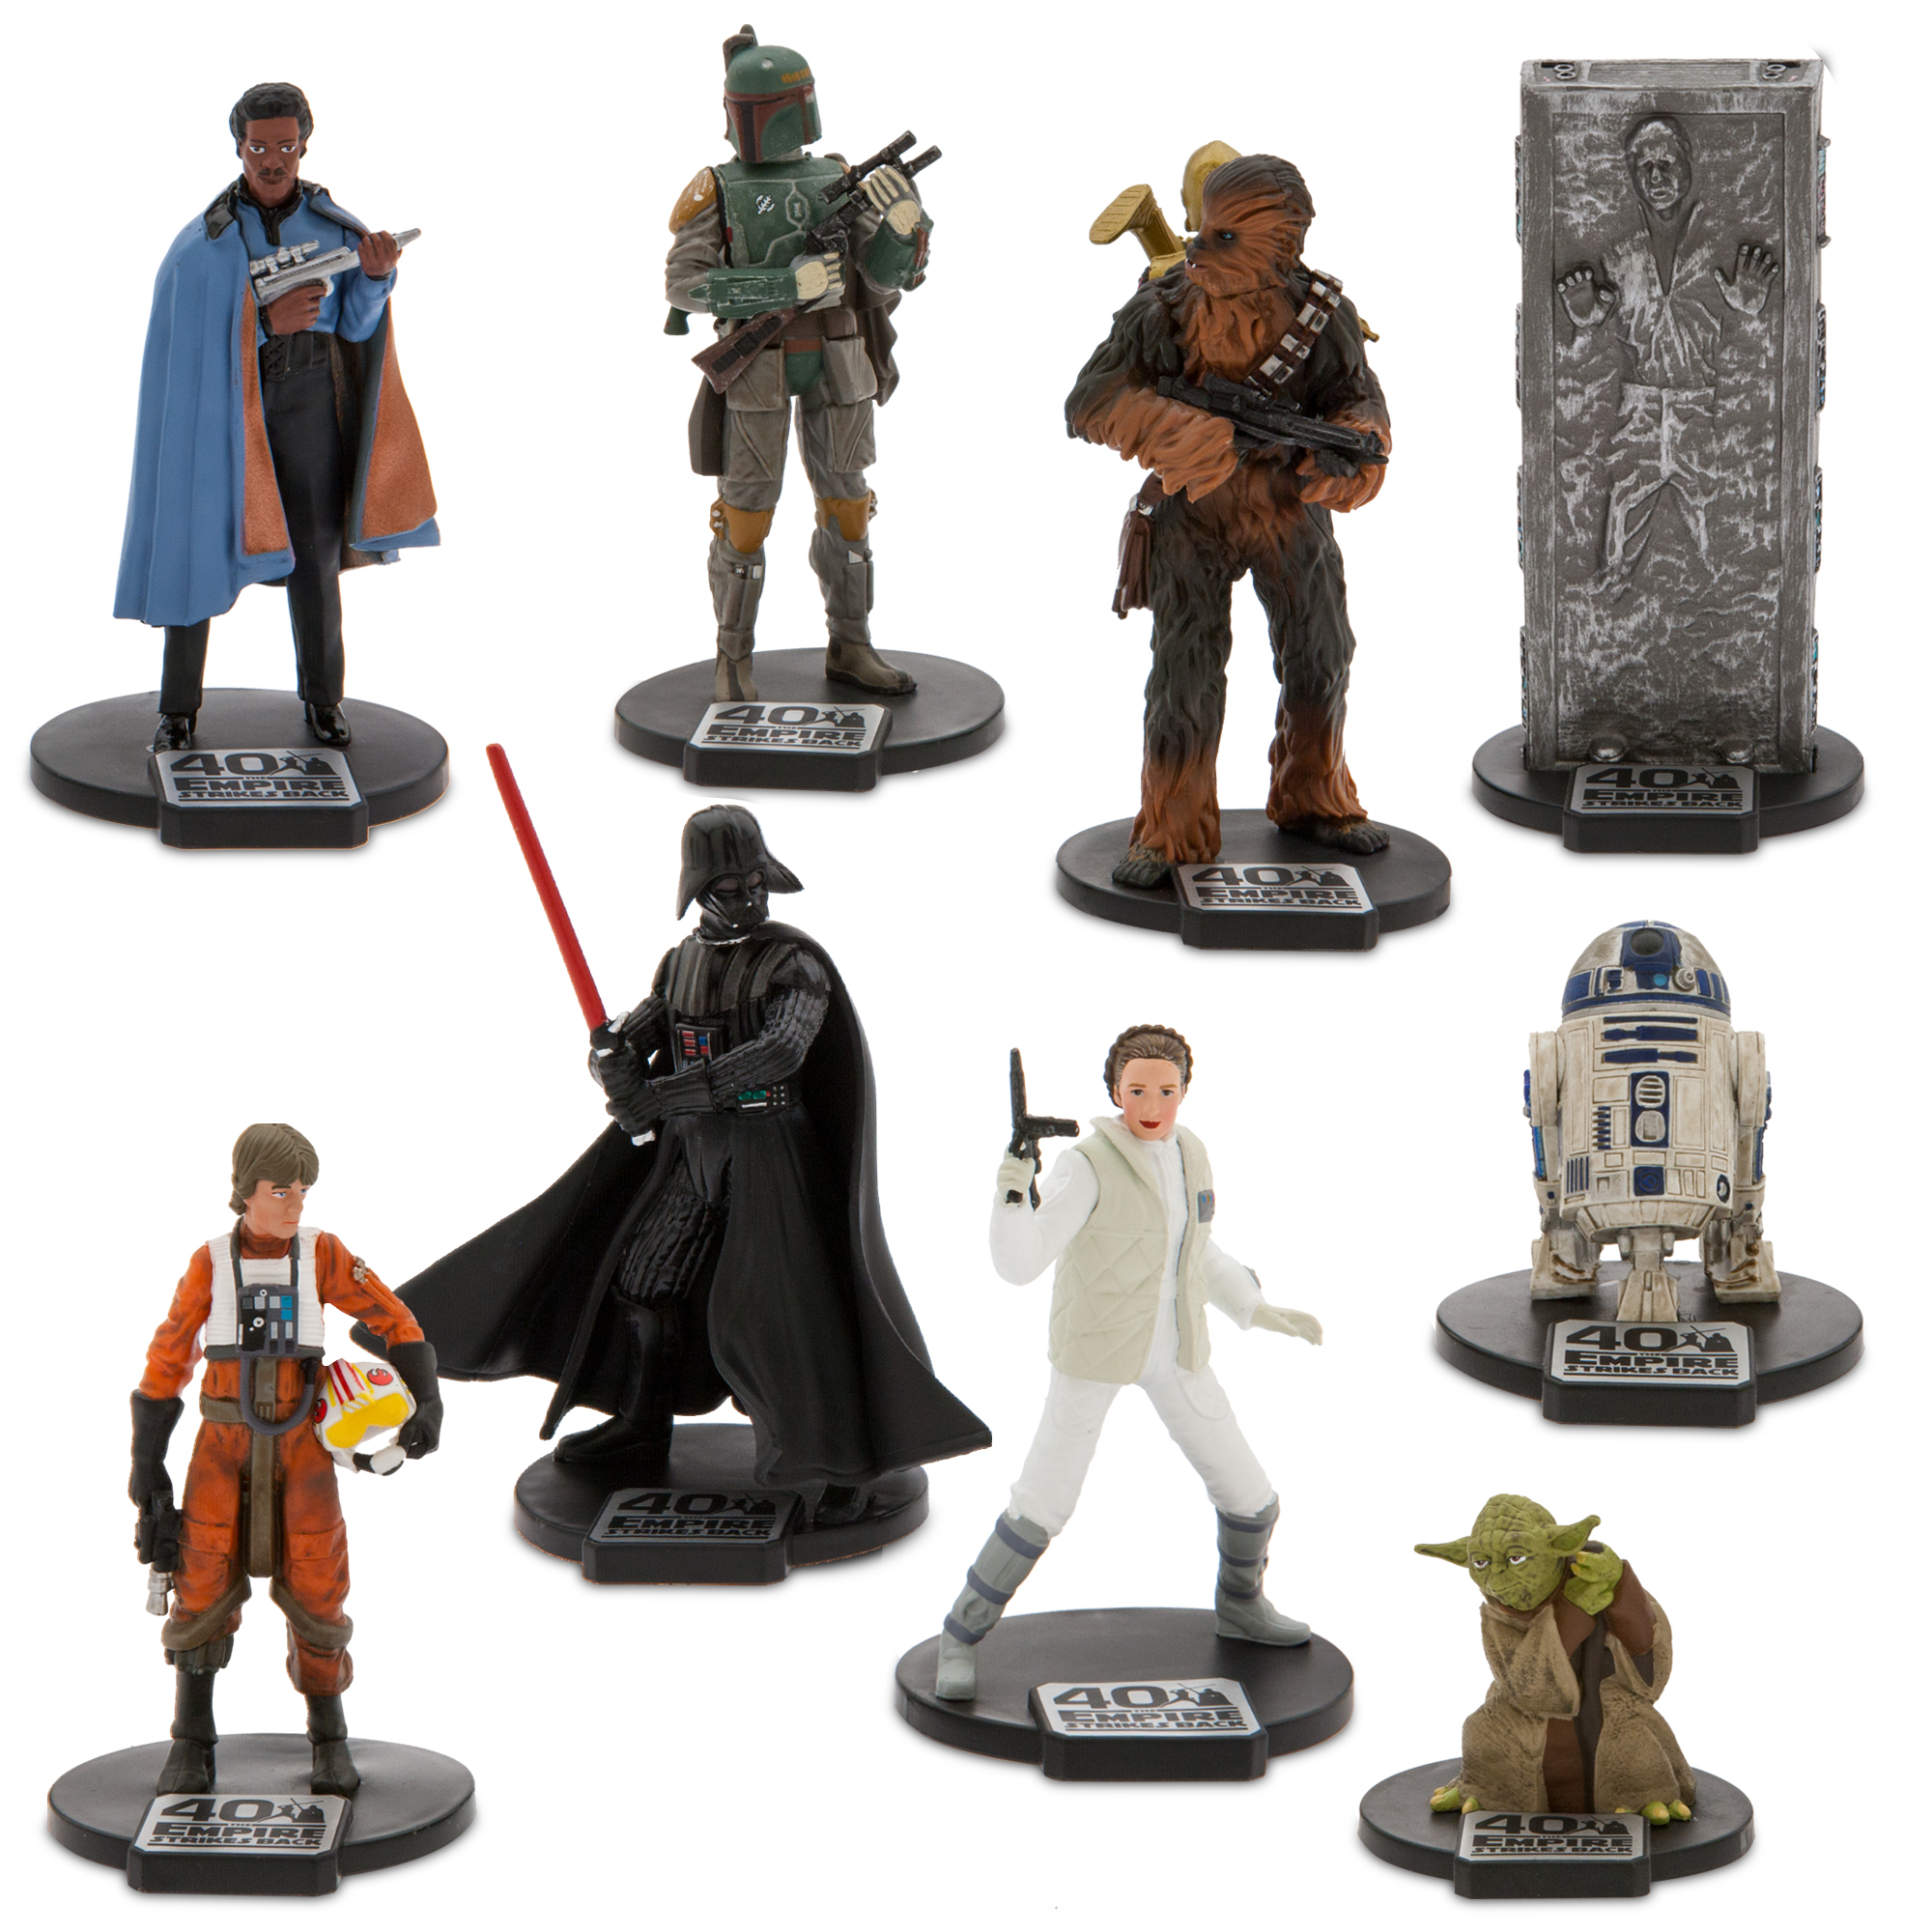 Exciting May The Fourth Merchandise shopDisney Exclusives